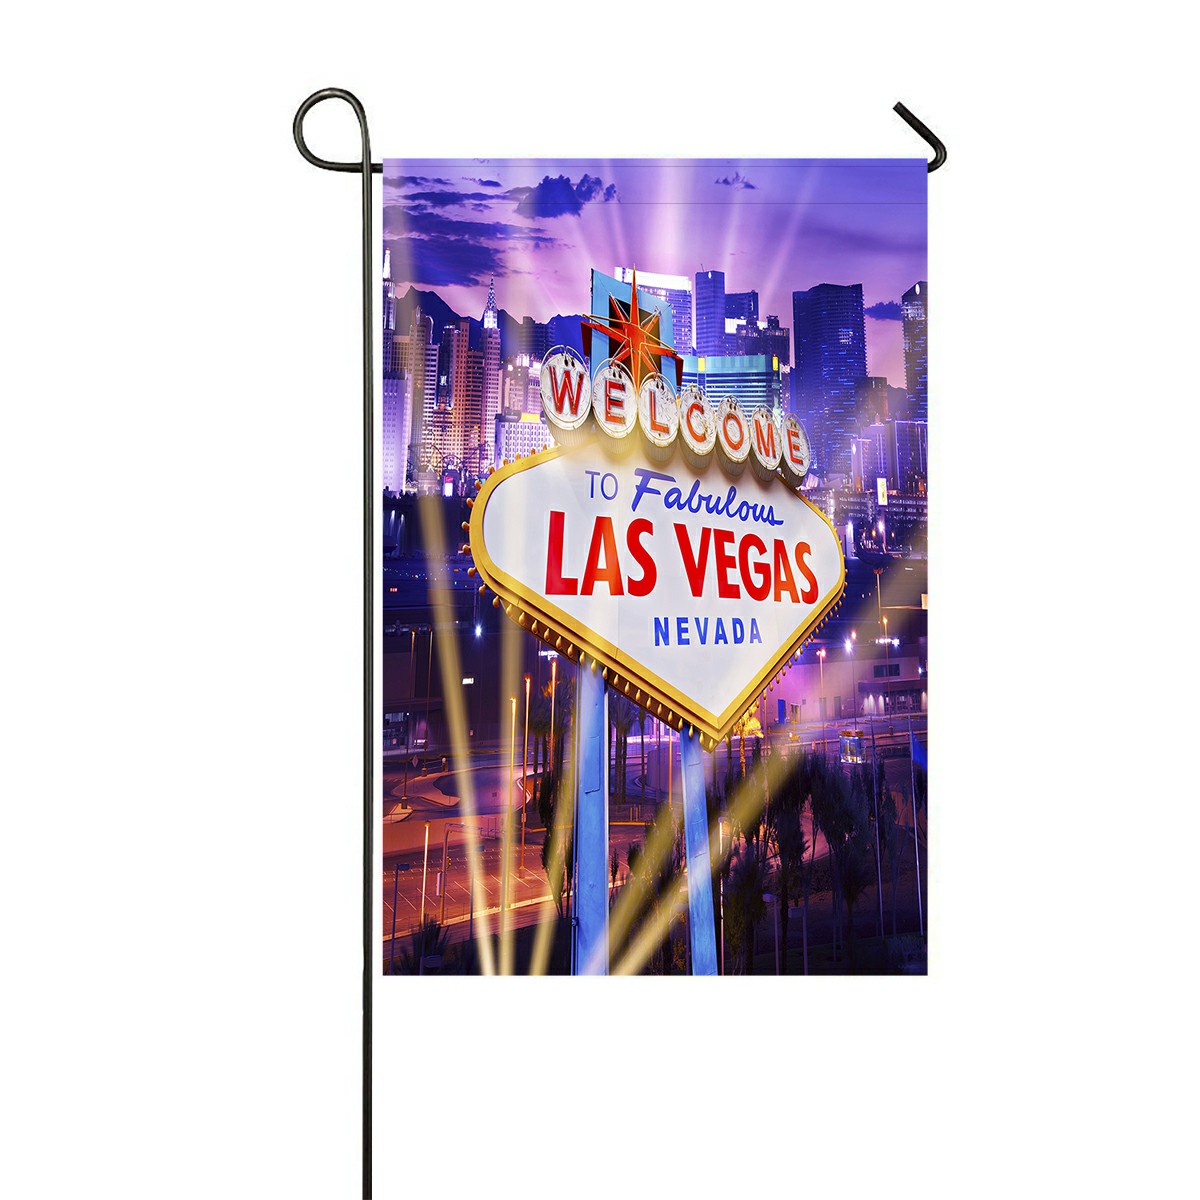 ABPHQTO Las Vegas Showtime Vegas Strip Welcome Sign Home Outdoor Garden Flag House Banner Size 12x18 Inch - image 1 of 1